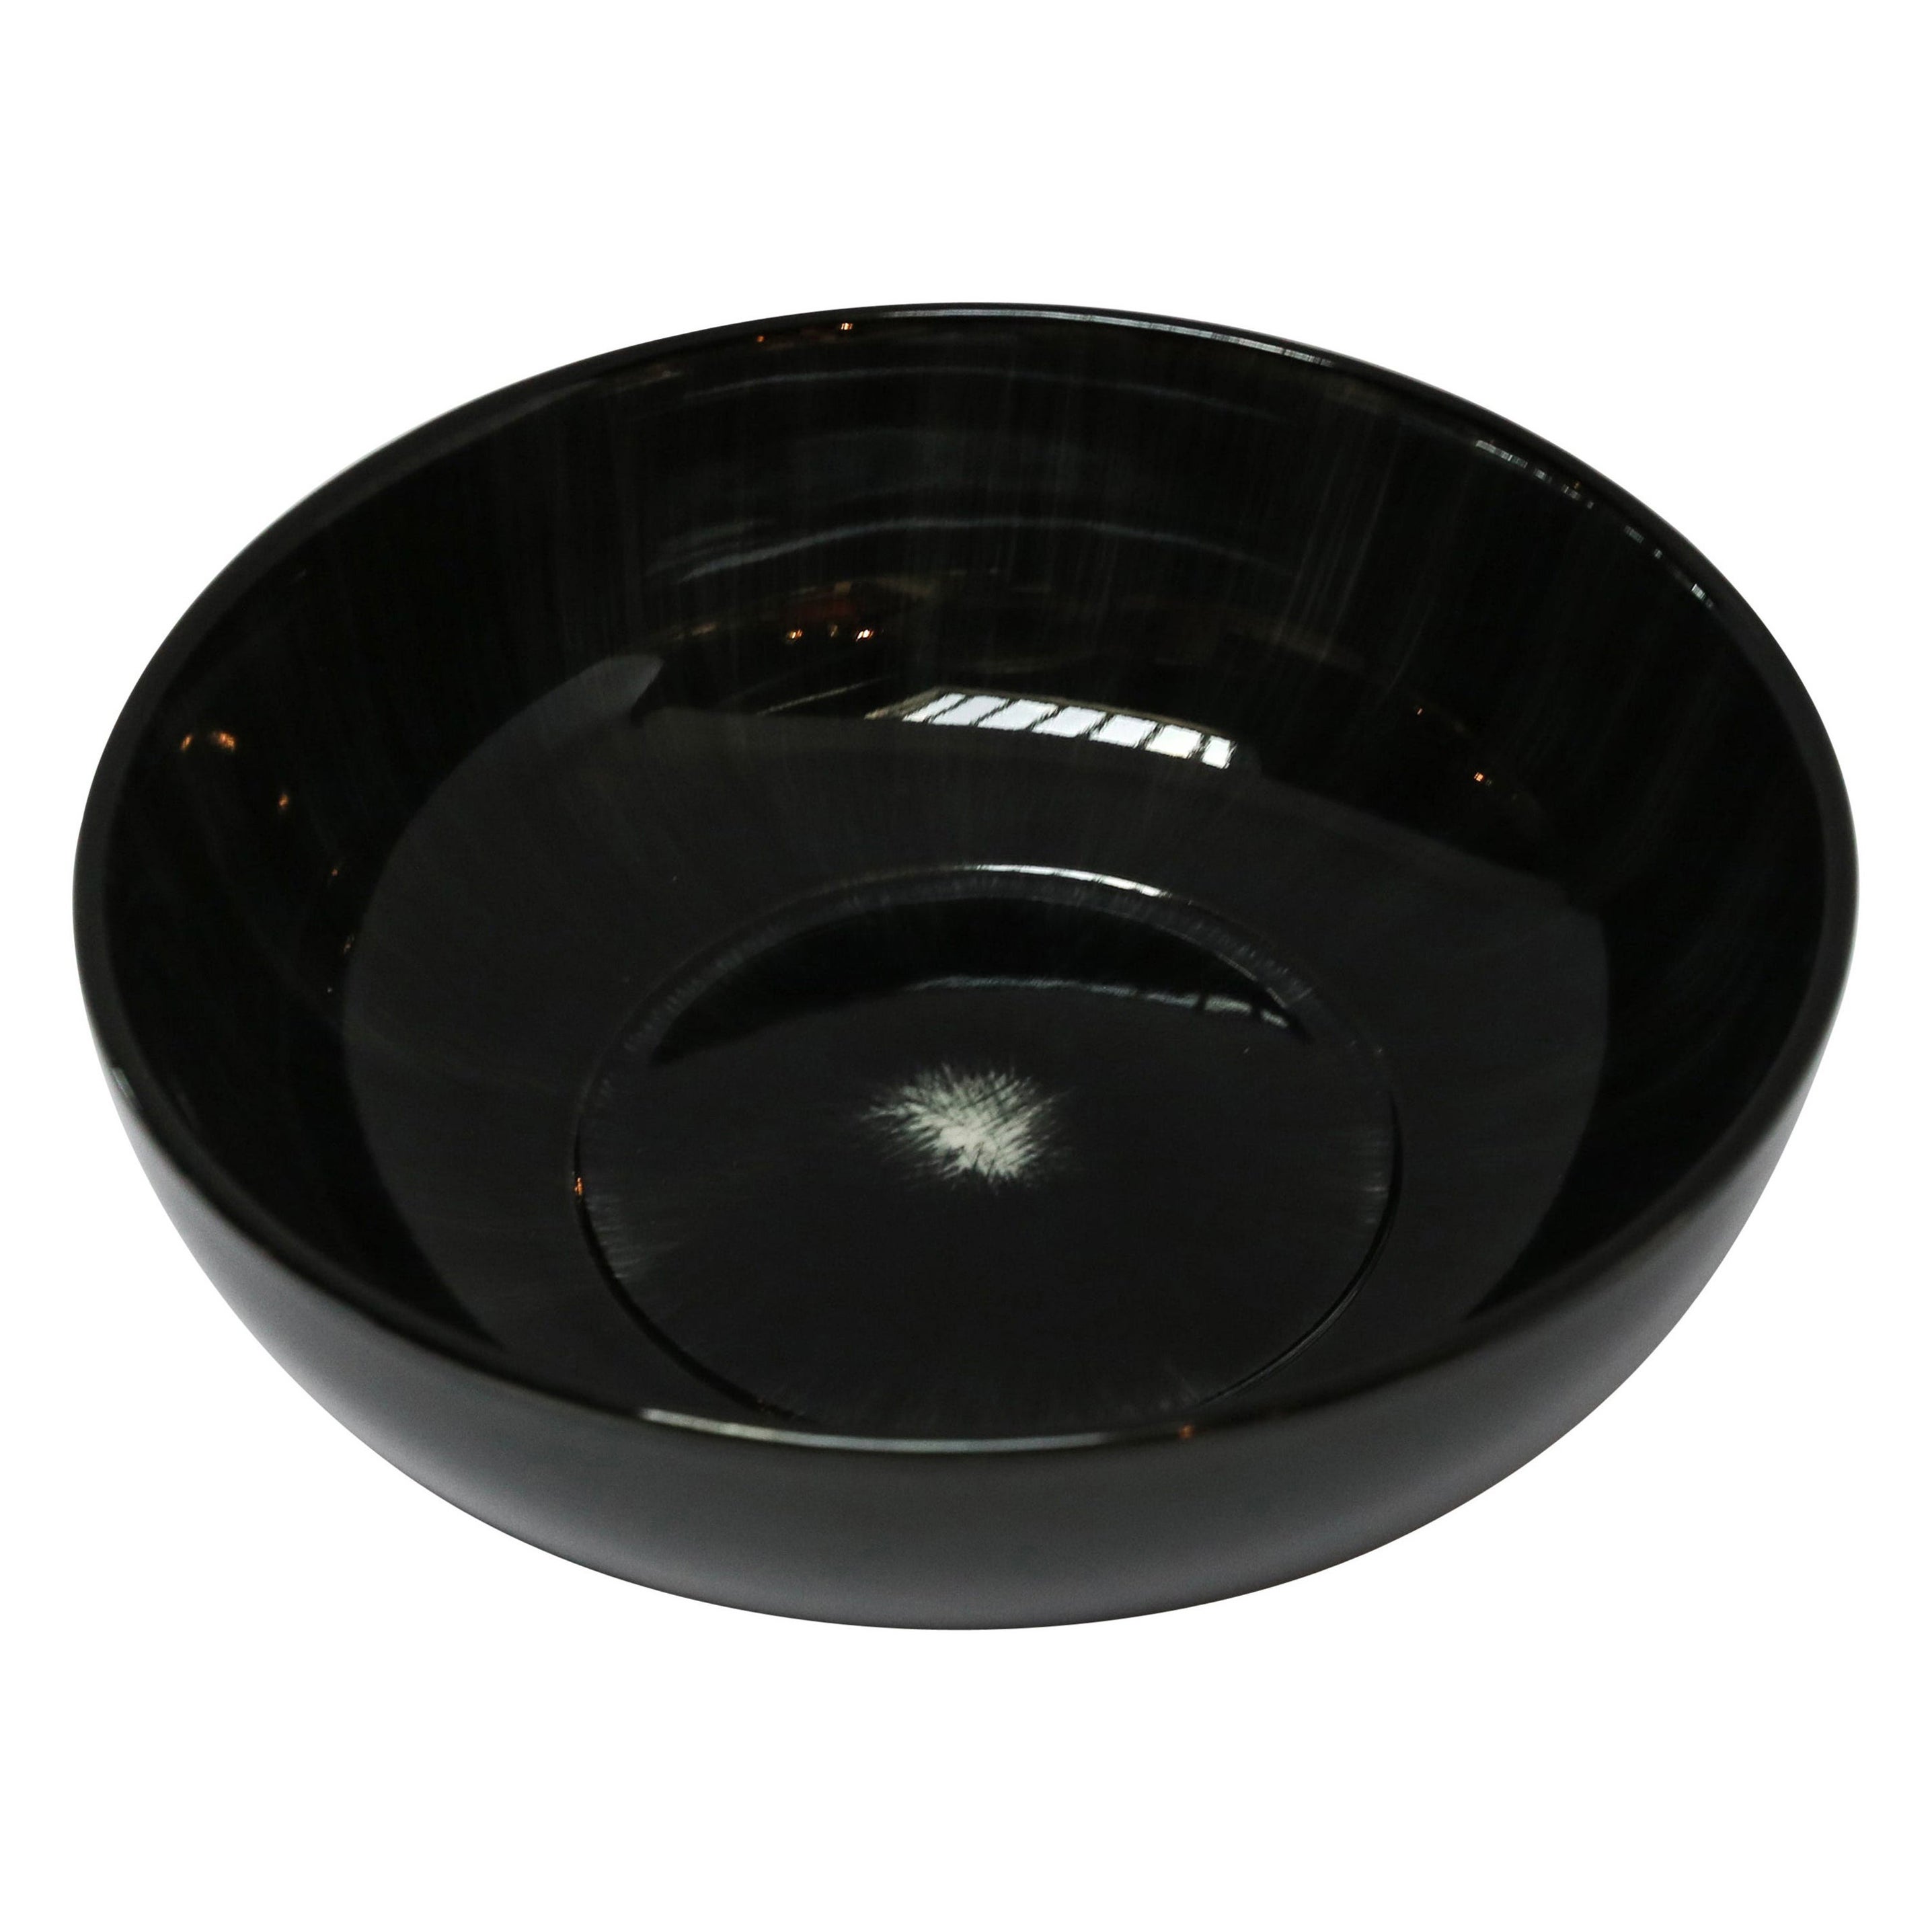 Ann Demeulemeester for Serax Dé X-Small High Plate / Bowl in Black / off White